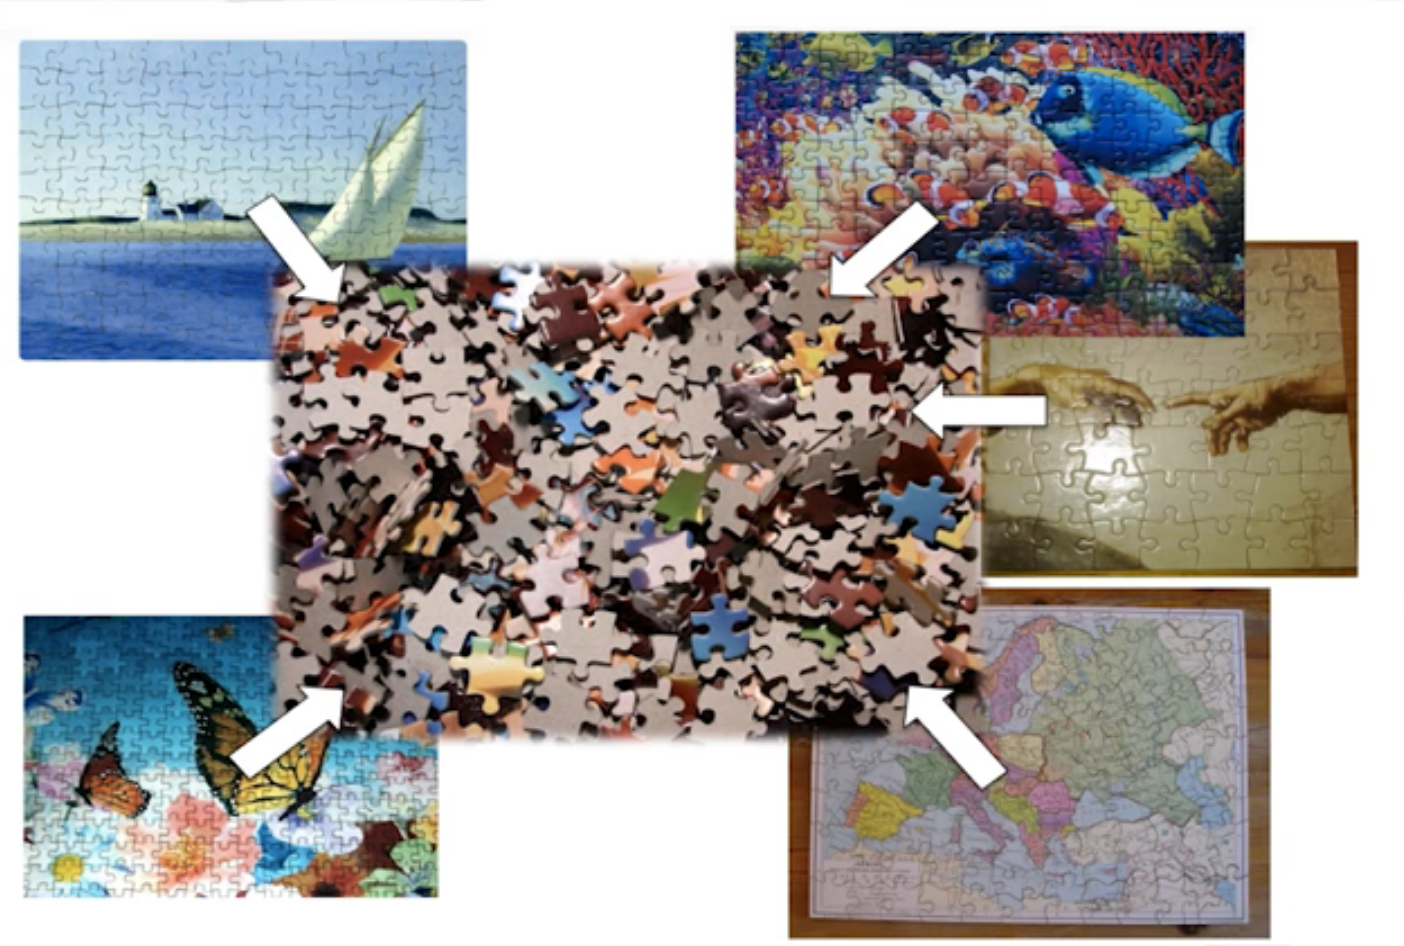 shotgun sequencing illustrated with jigsaw puzzles, severla individual puzzles are mixed together.